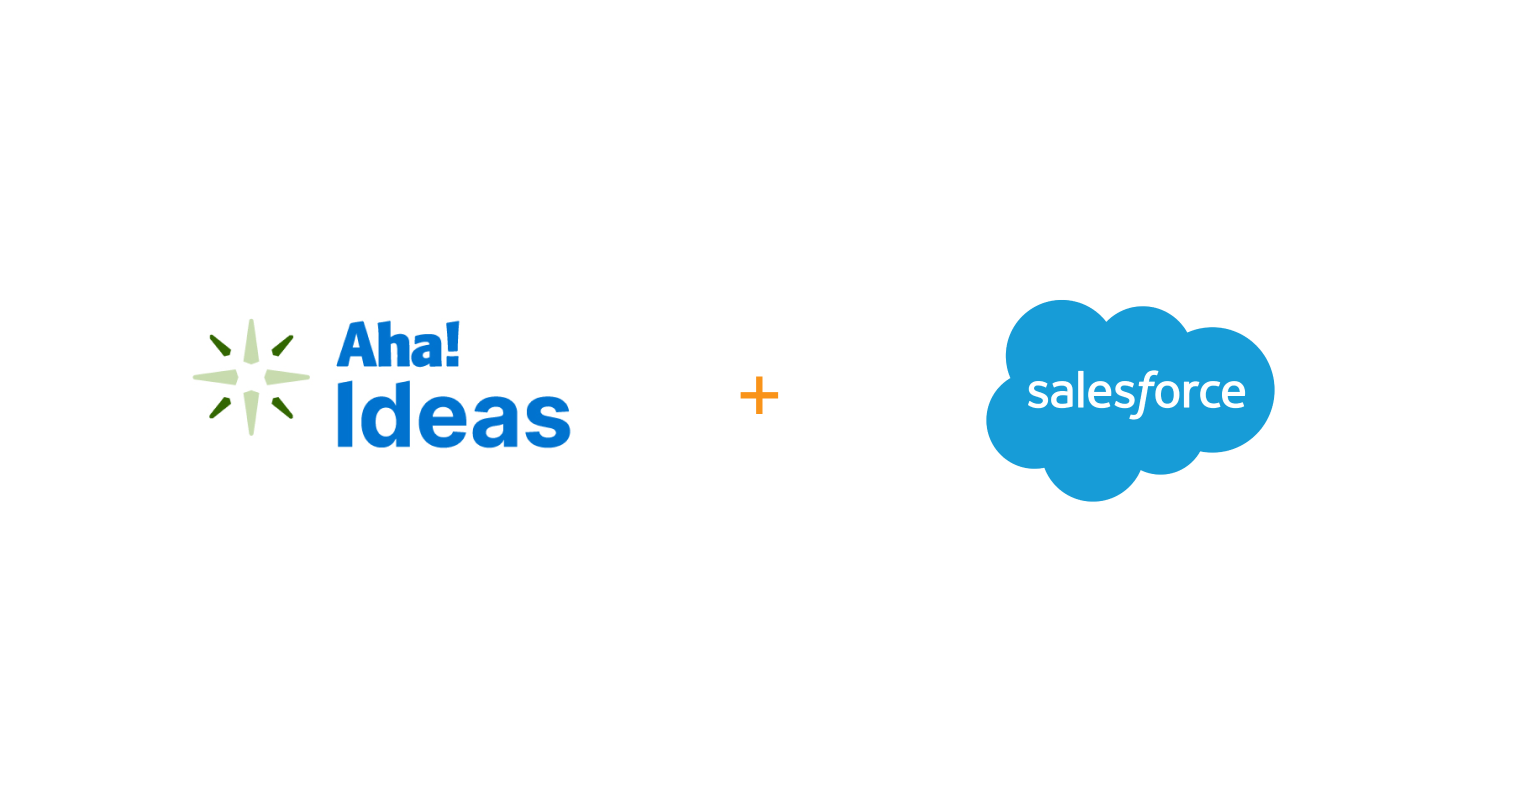 Hero image for the Aha! Ideas Salesforce Lightning go-to-market post.